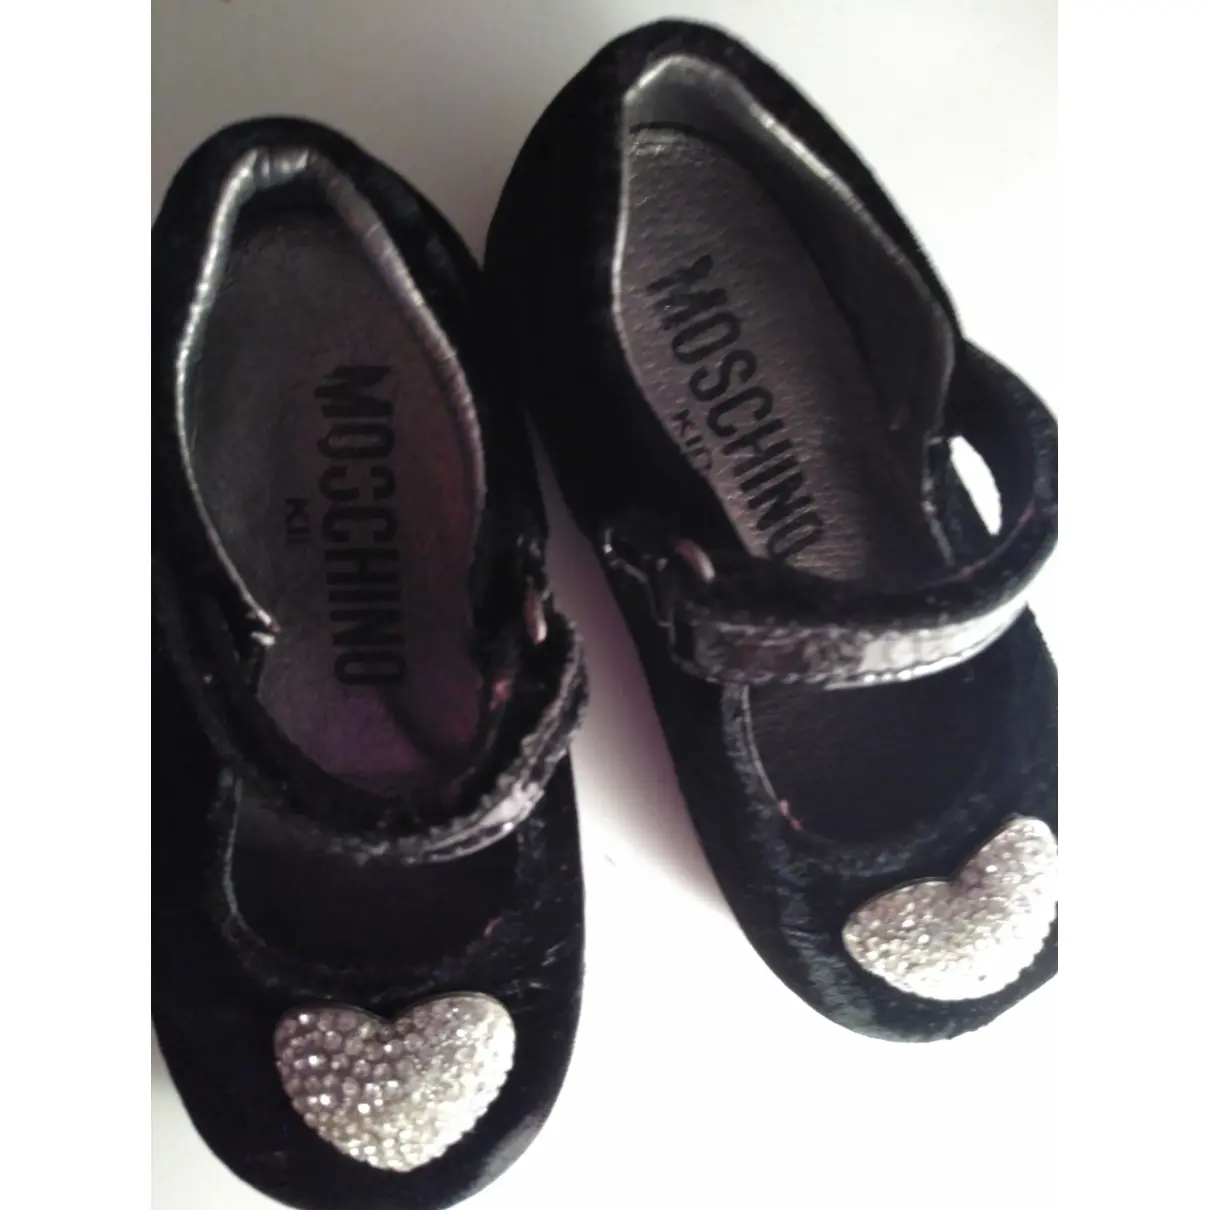 Moschino Ballet flats for sale